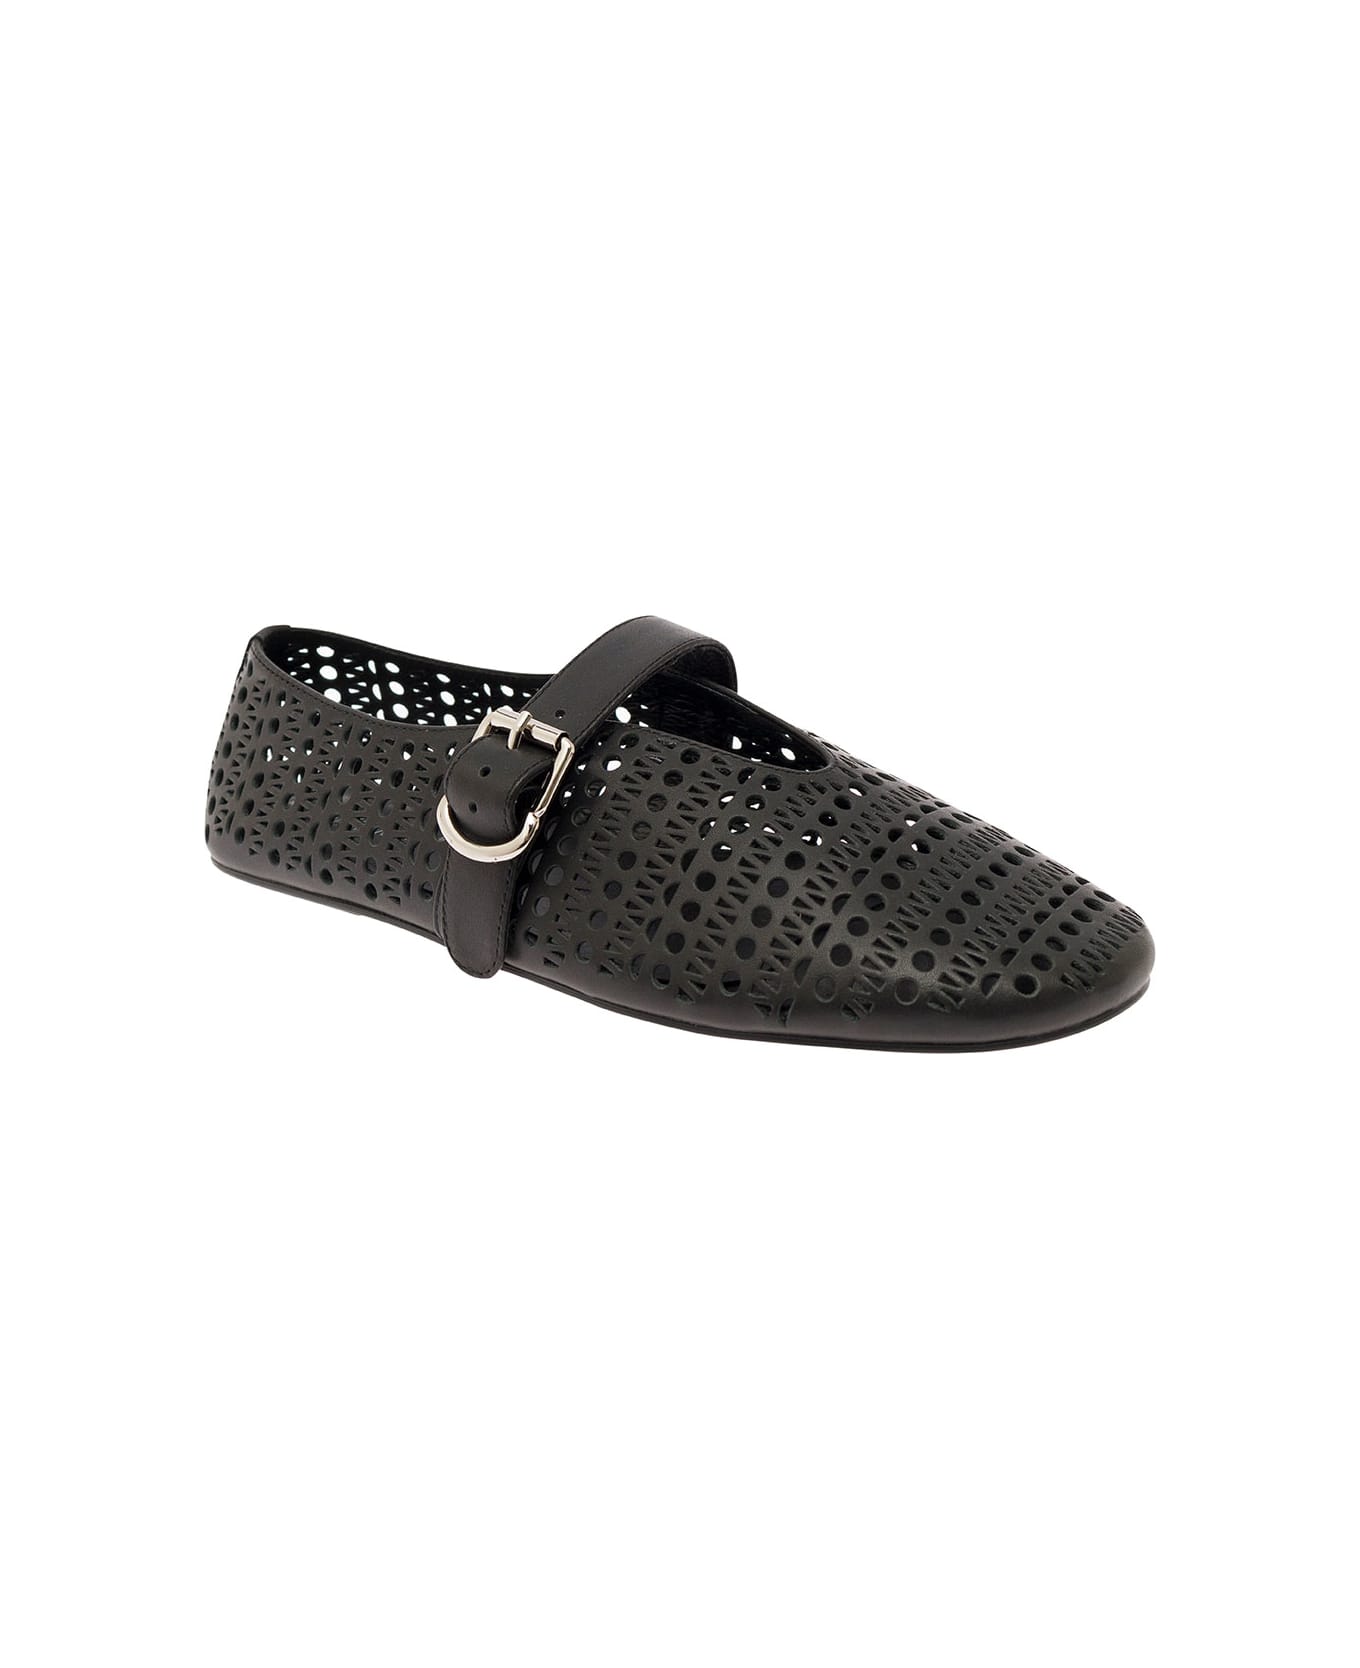 Jeffrey Campbell 'shelly' Black Ballet Flats With Maxi Buckle In Lace Effect Leather Woman - Black フラットシューズ